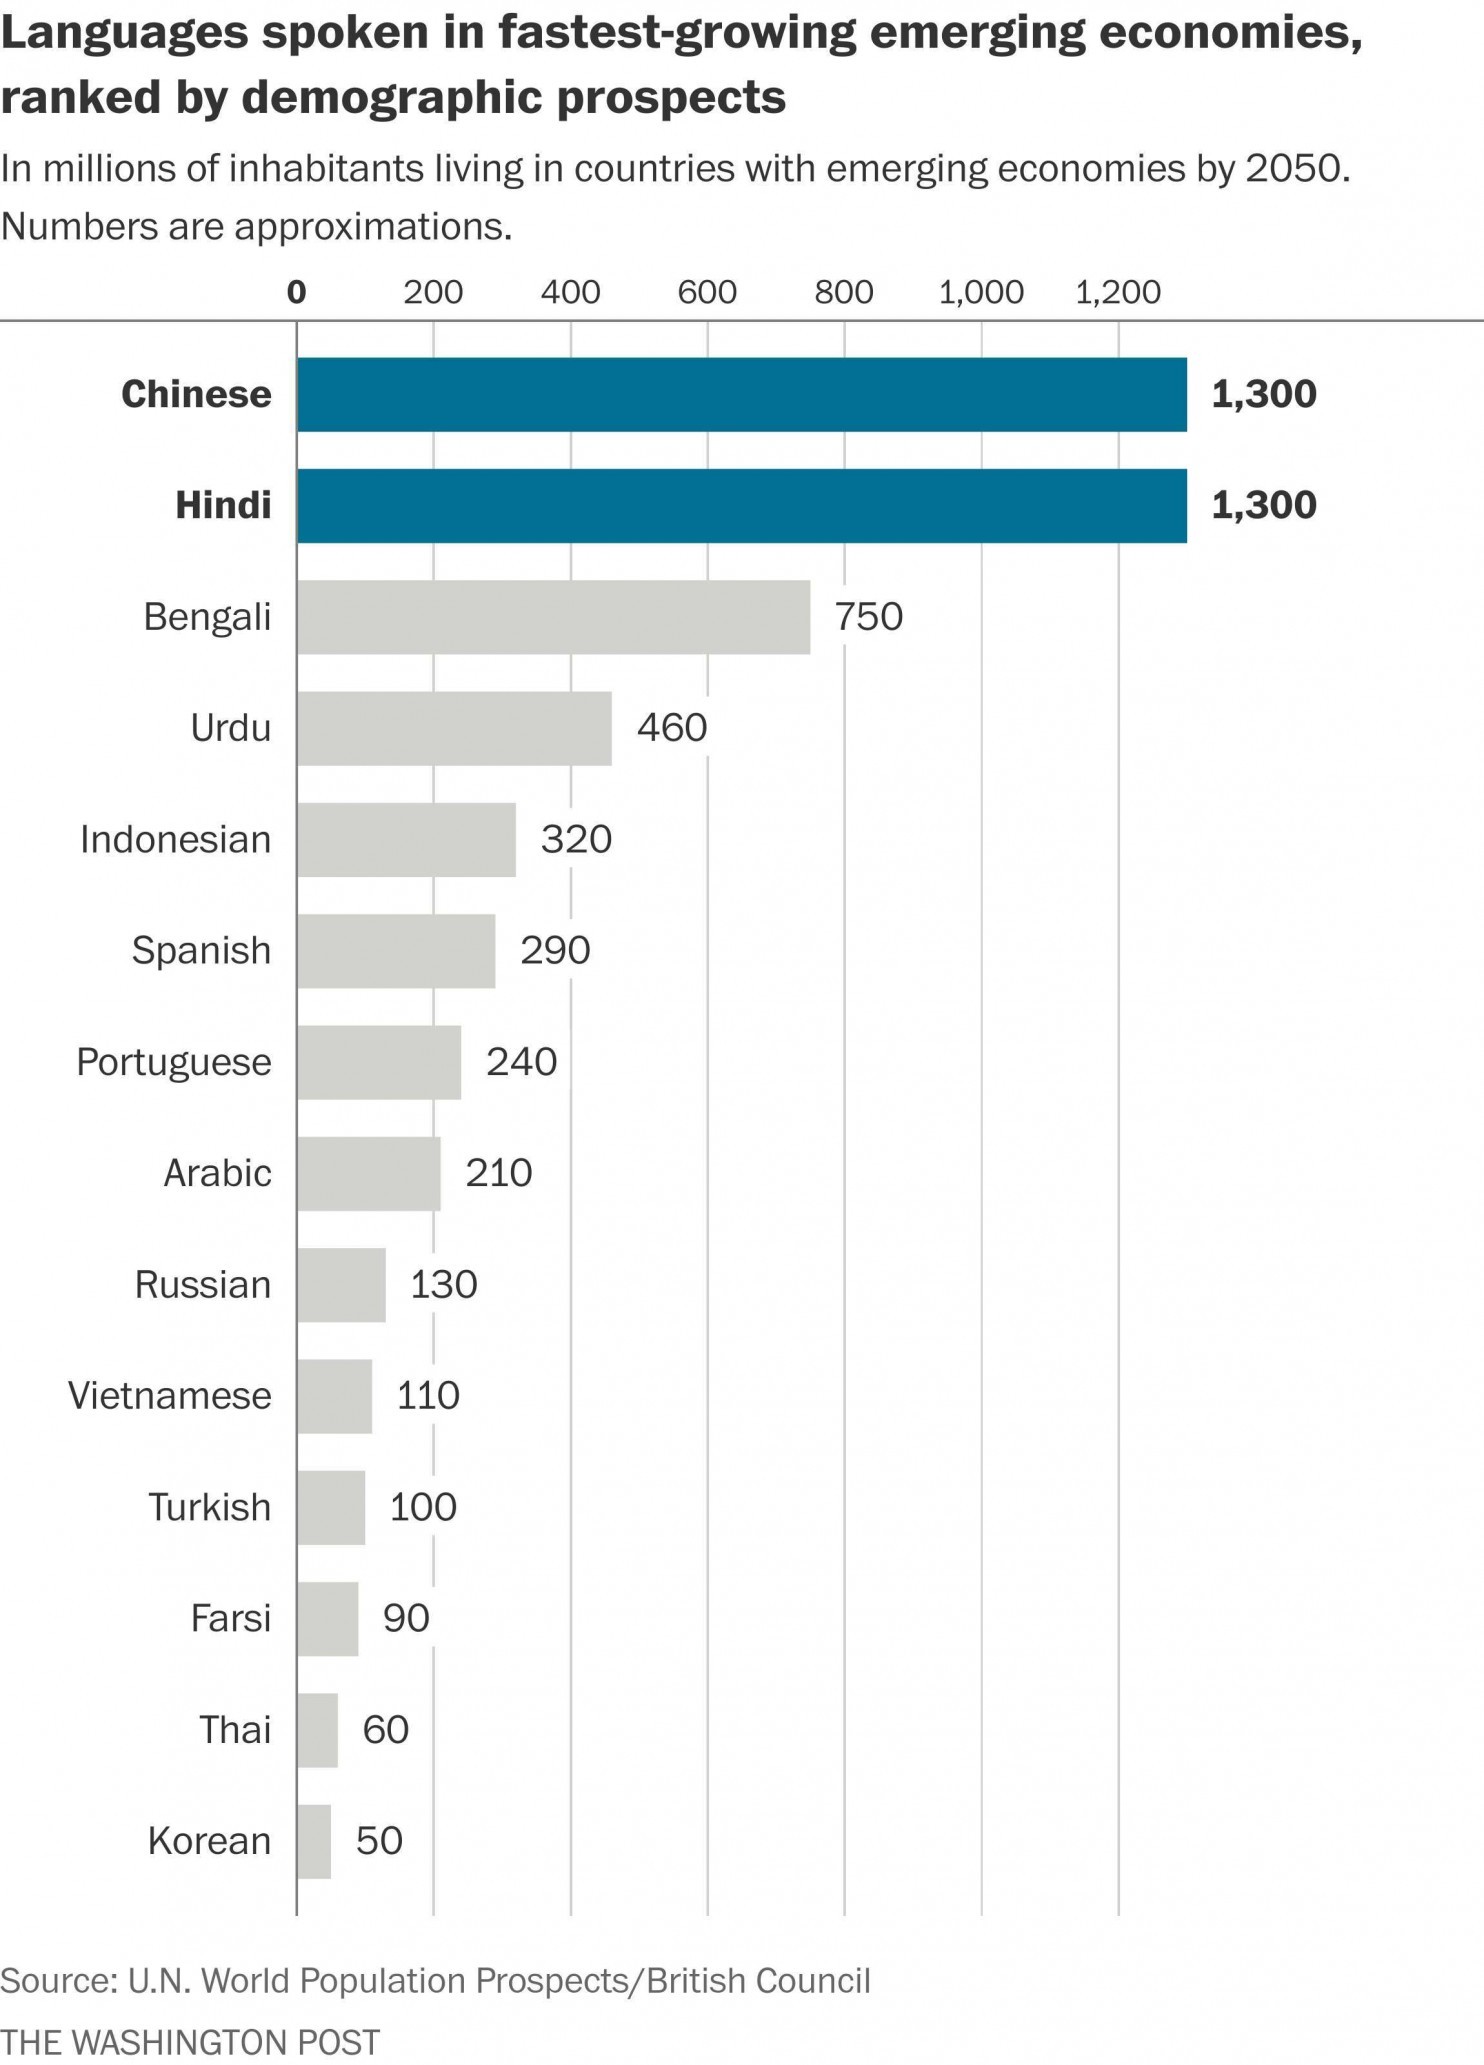 langues-in-fastest-growing-economies